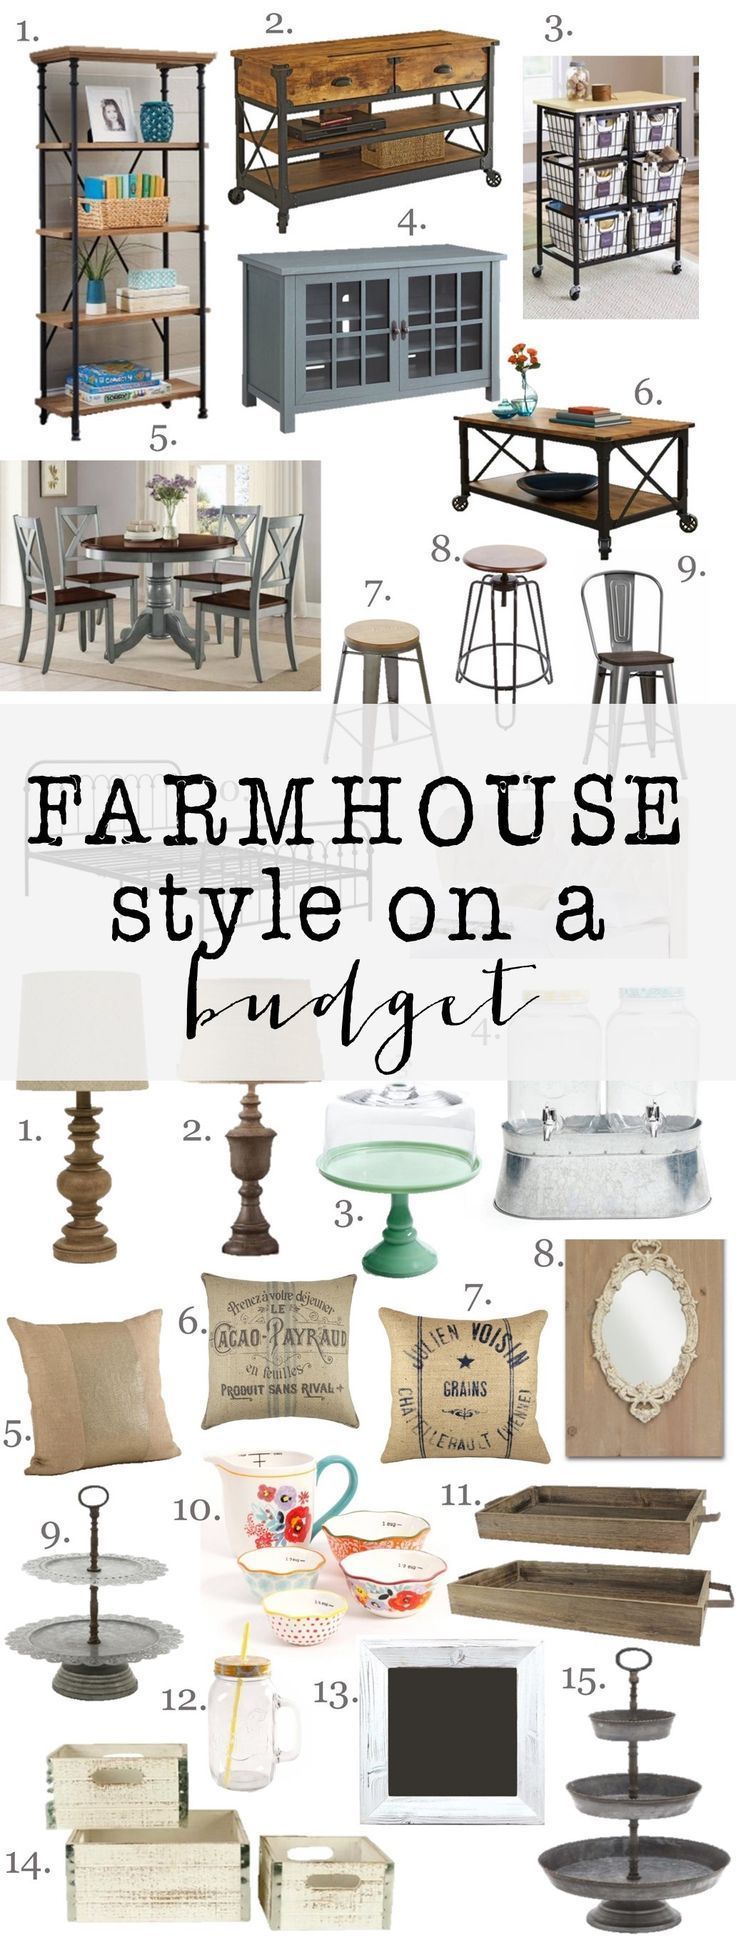 European Inspired Design - Our Work Featured in At Home. The Best of home decor ideas in 2017 -   24 farmhouse style on a budget
 ideas